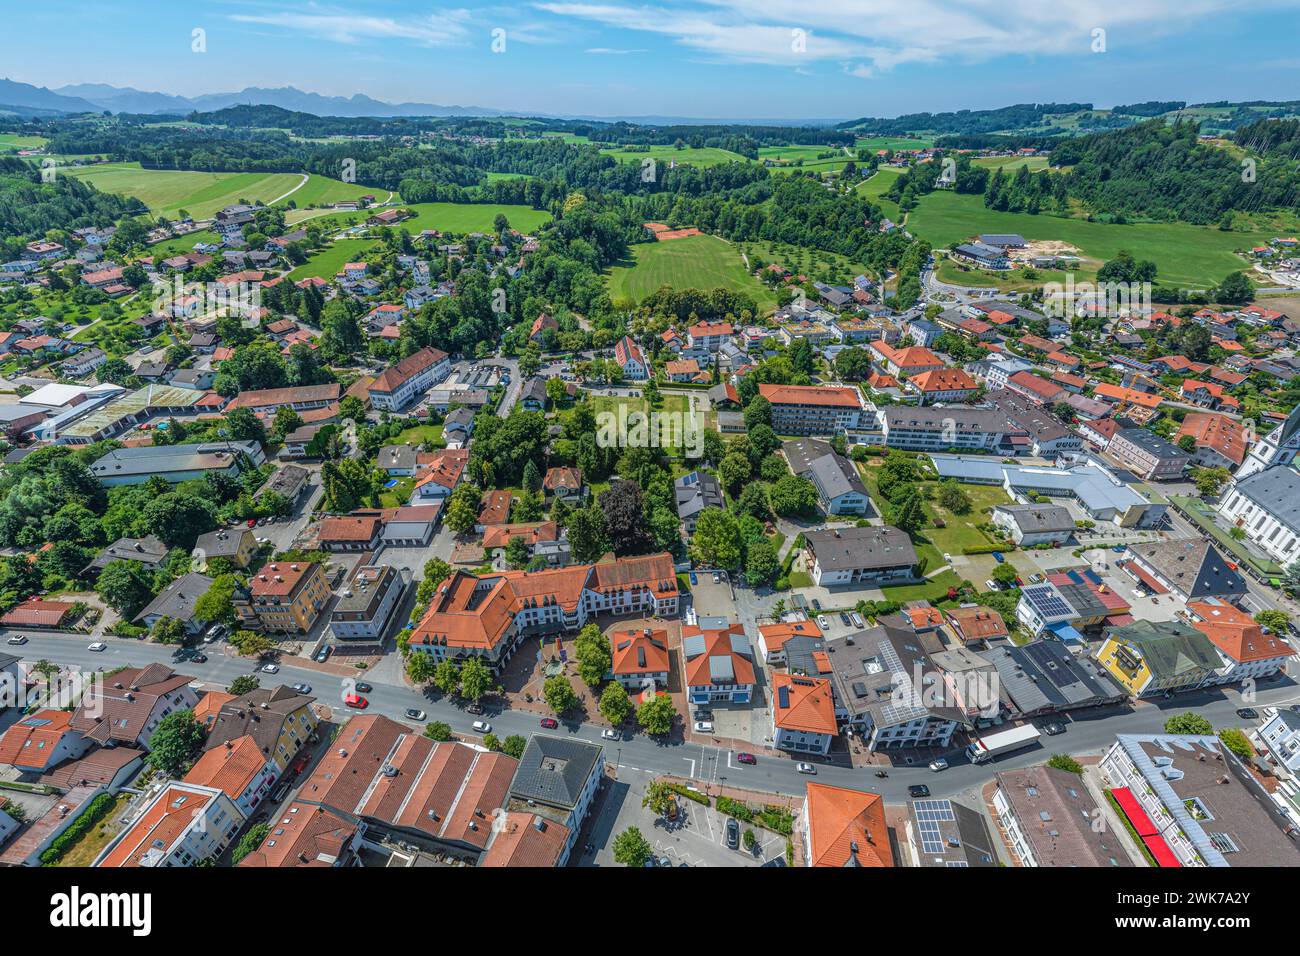 The municipality of Prien am Chiemsee in the Upper Bavarian Chiemgau region from above Stock Photo